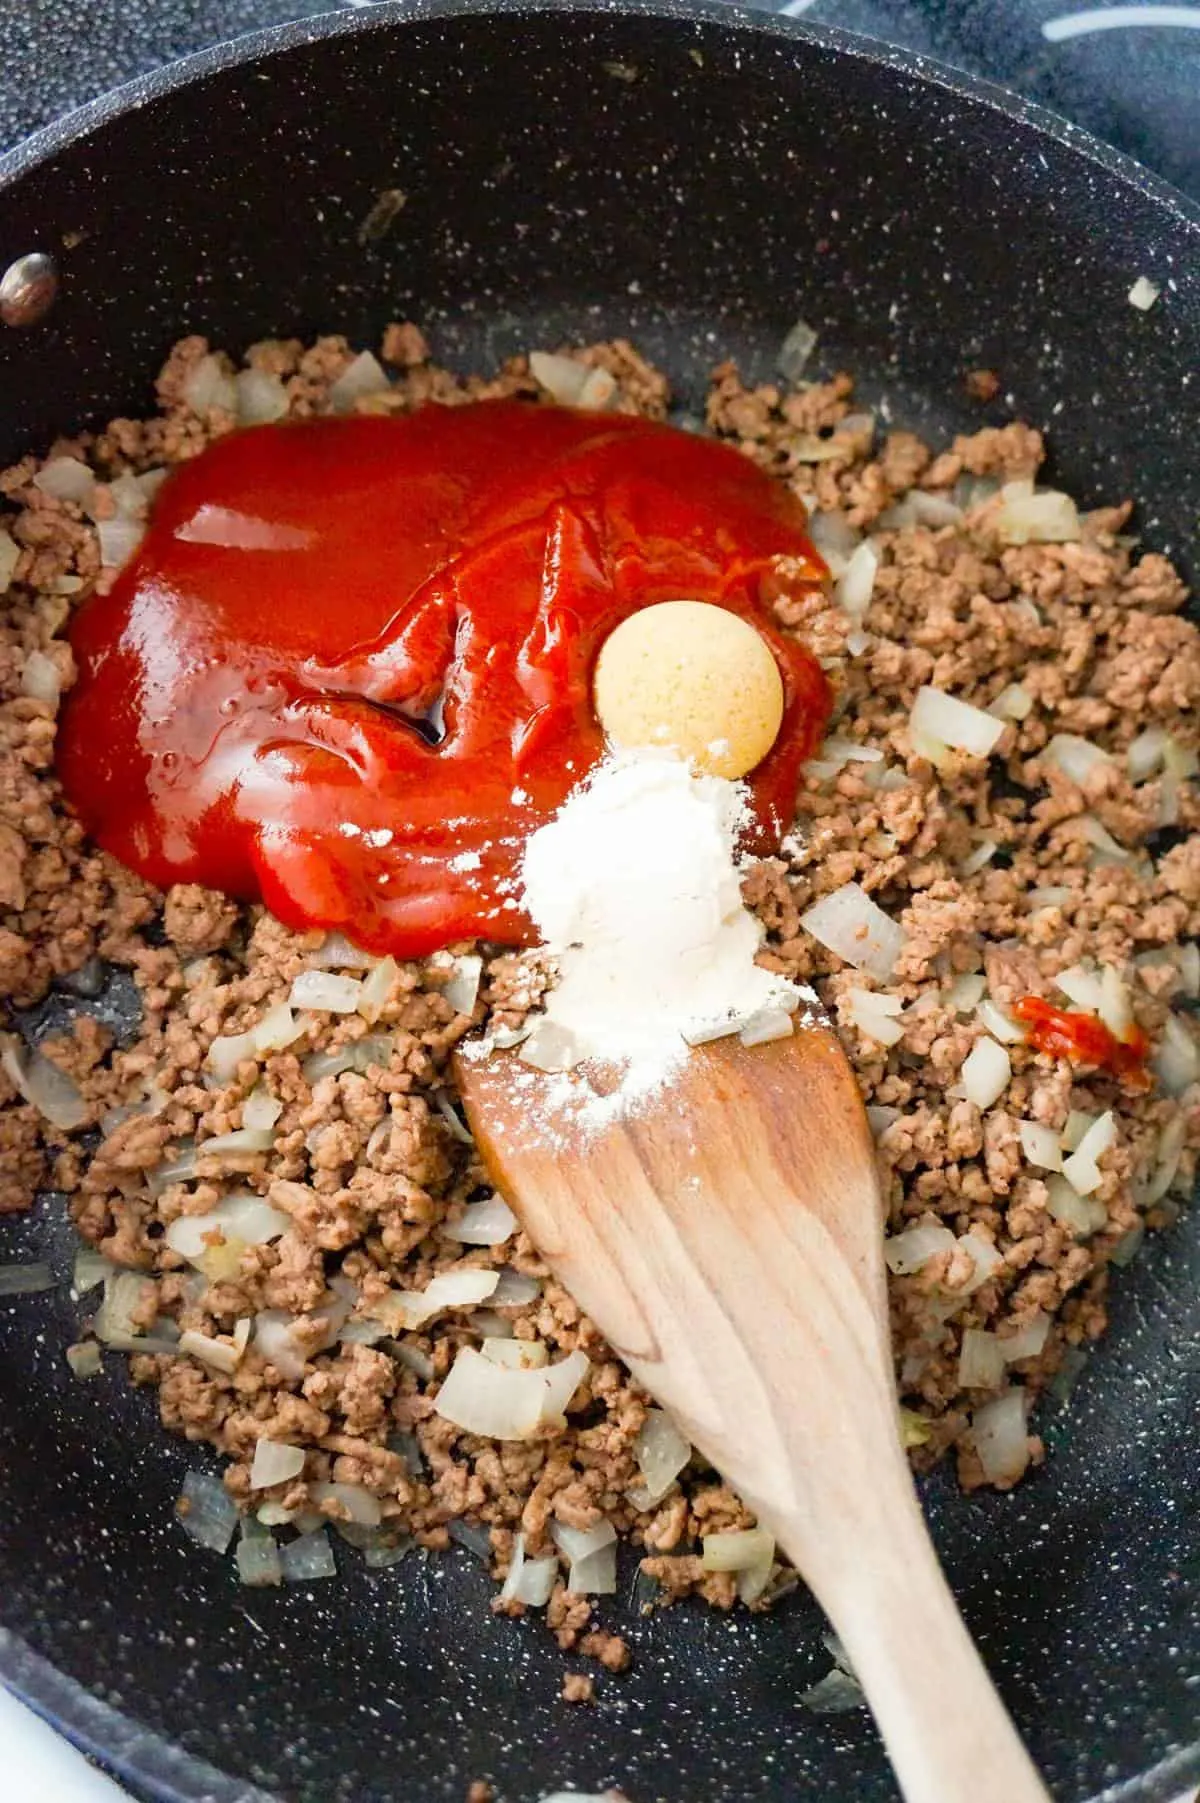 ketchup, brown sugar and onion powder on top of cooked ground beef in a saute pan